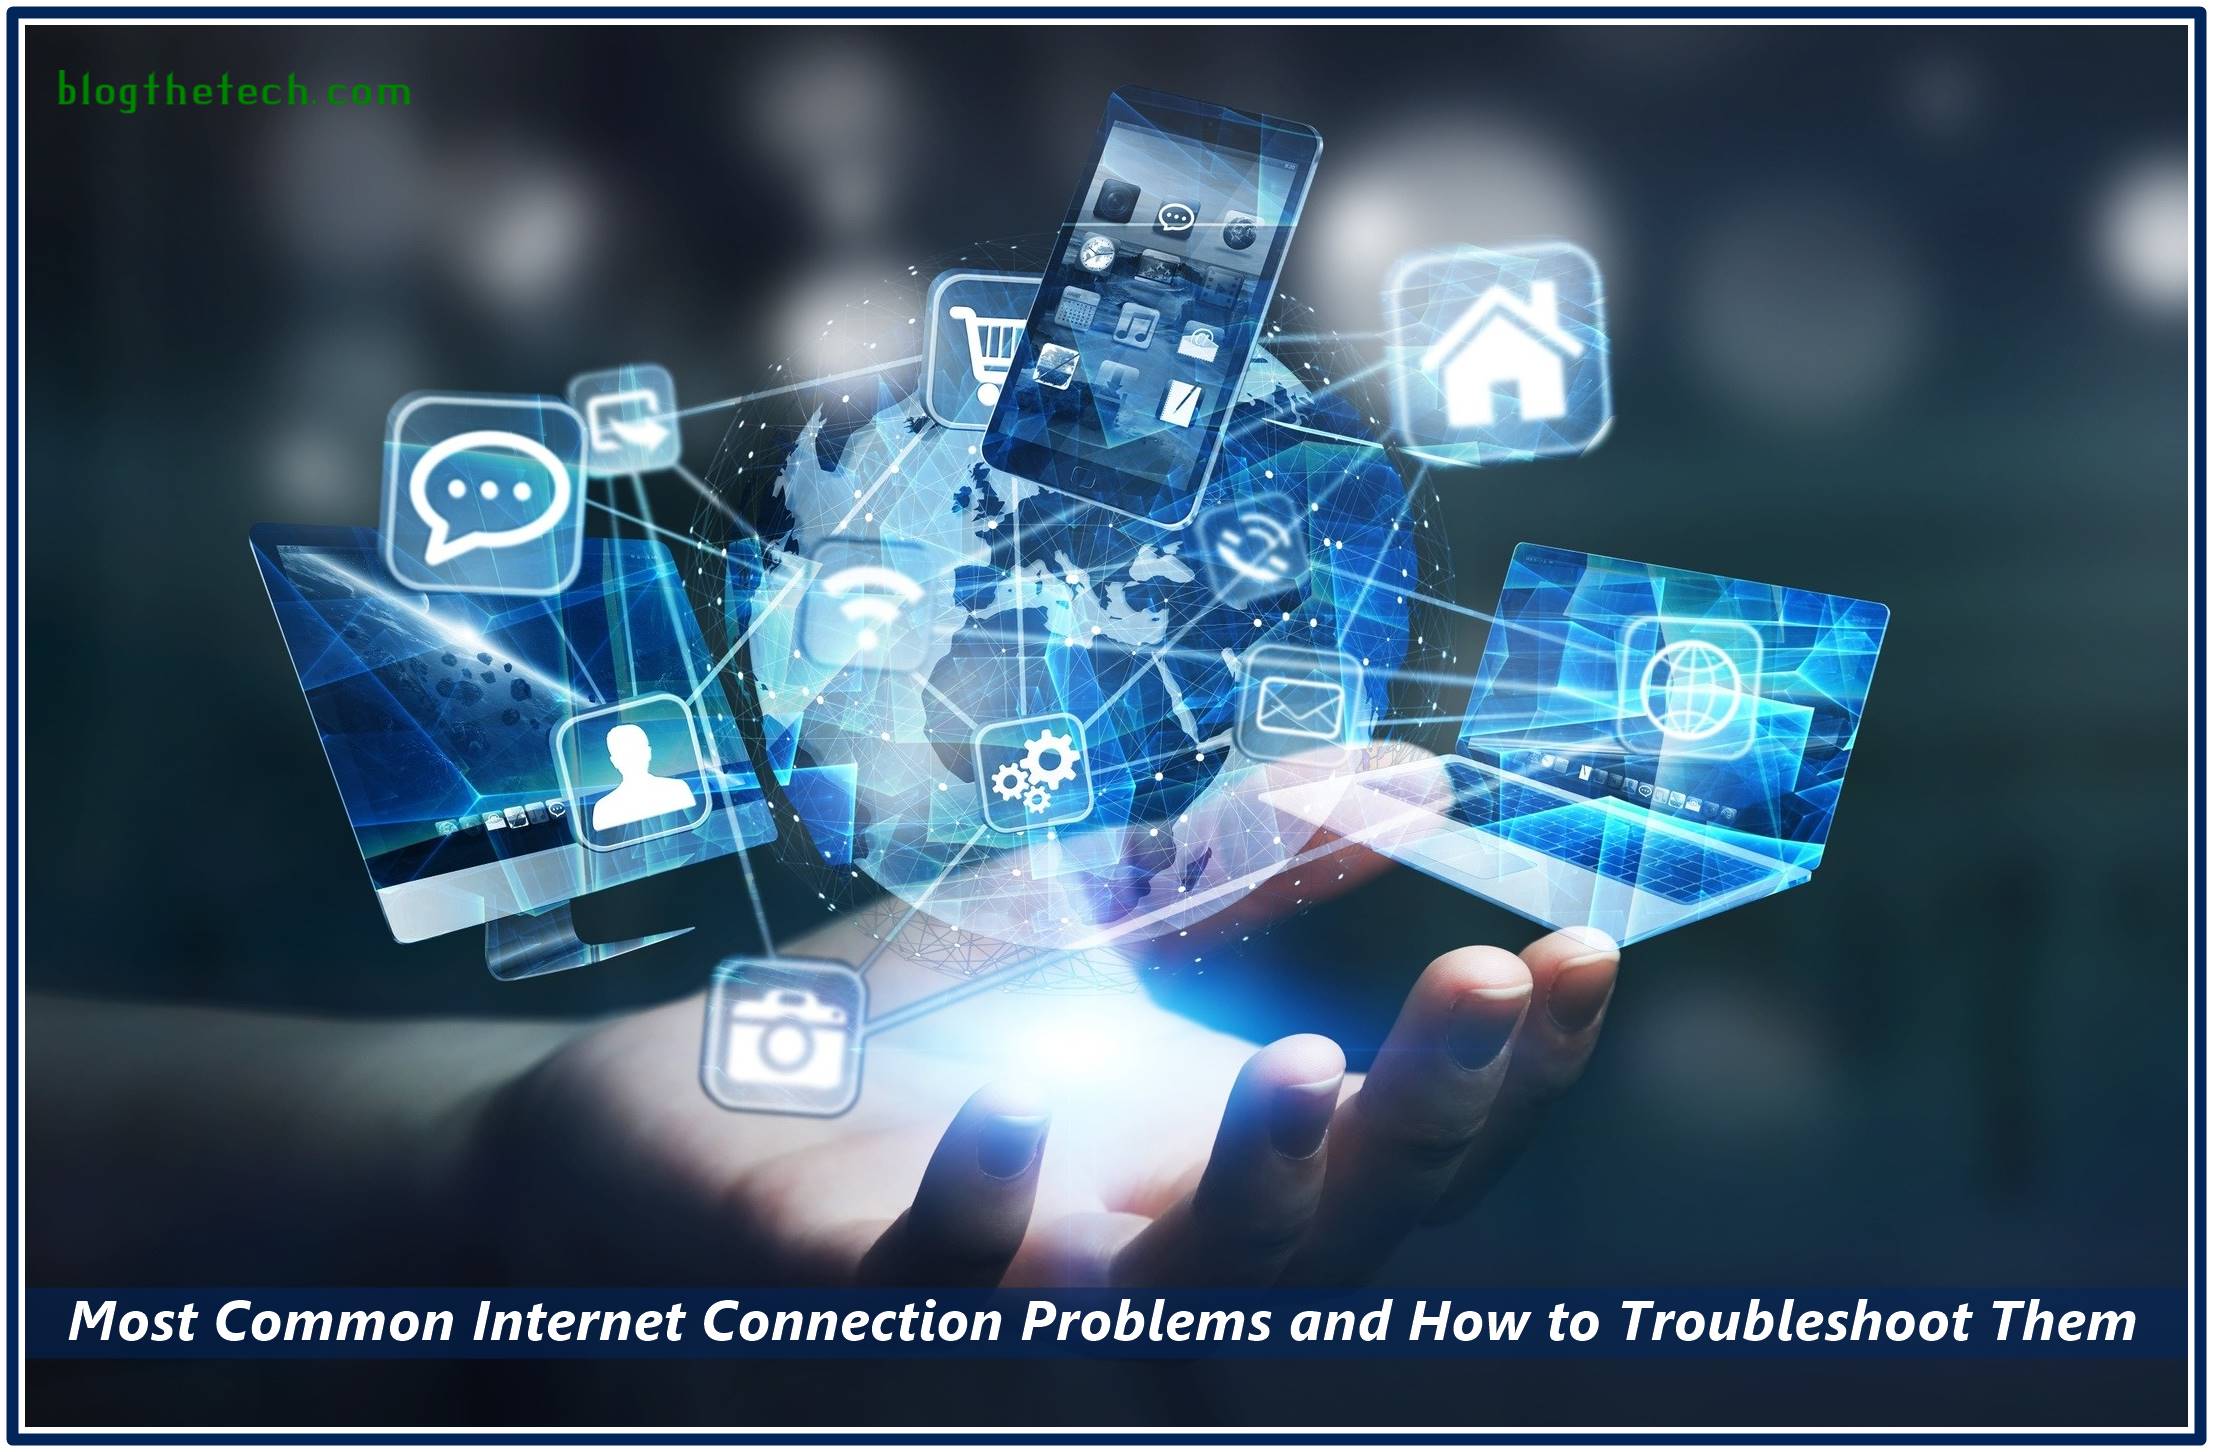 Most Common Internet Connection Problems and How to Troubleshoot Them